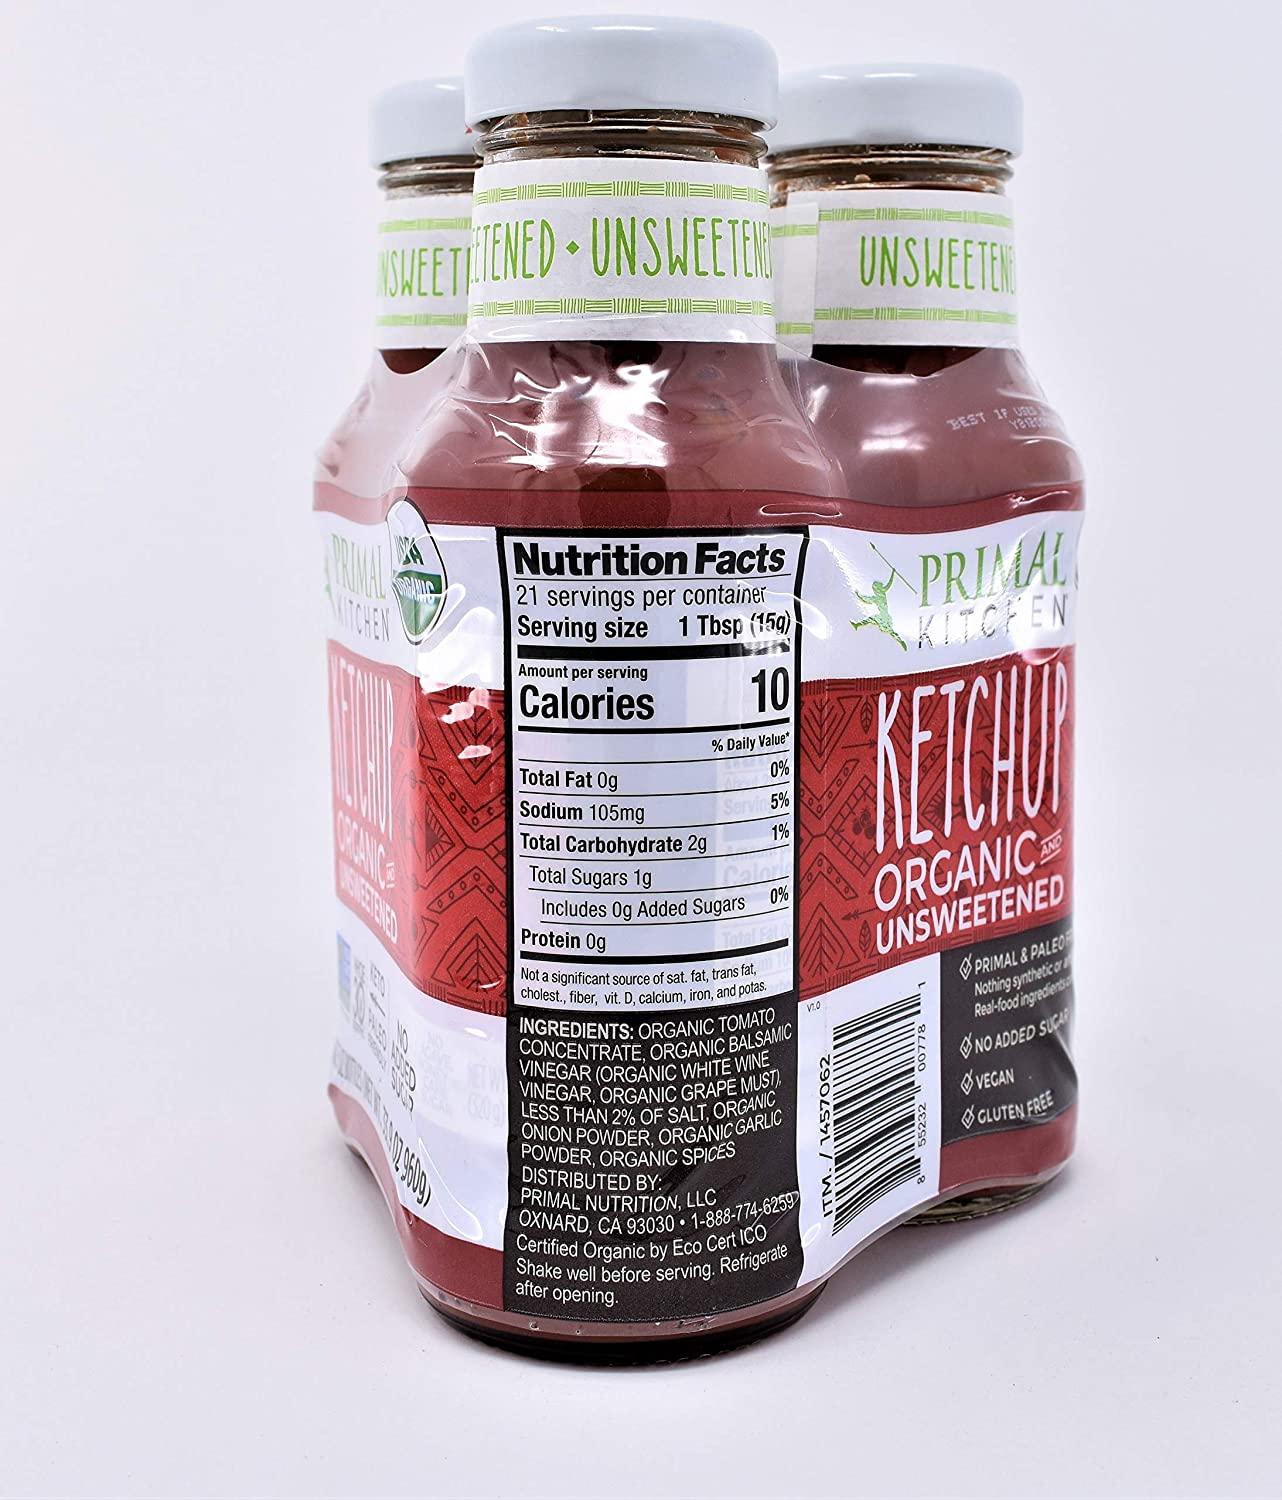 Primal Kitchen Organic and Unsweetened Ketchup 11.3 oz